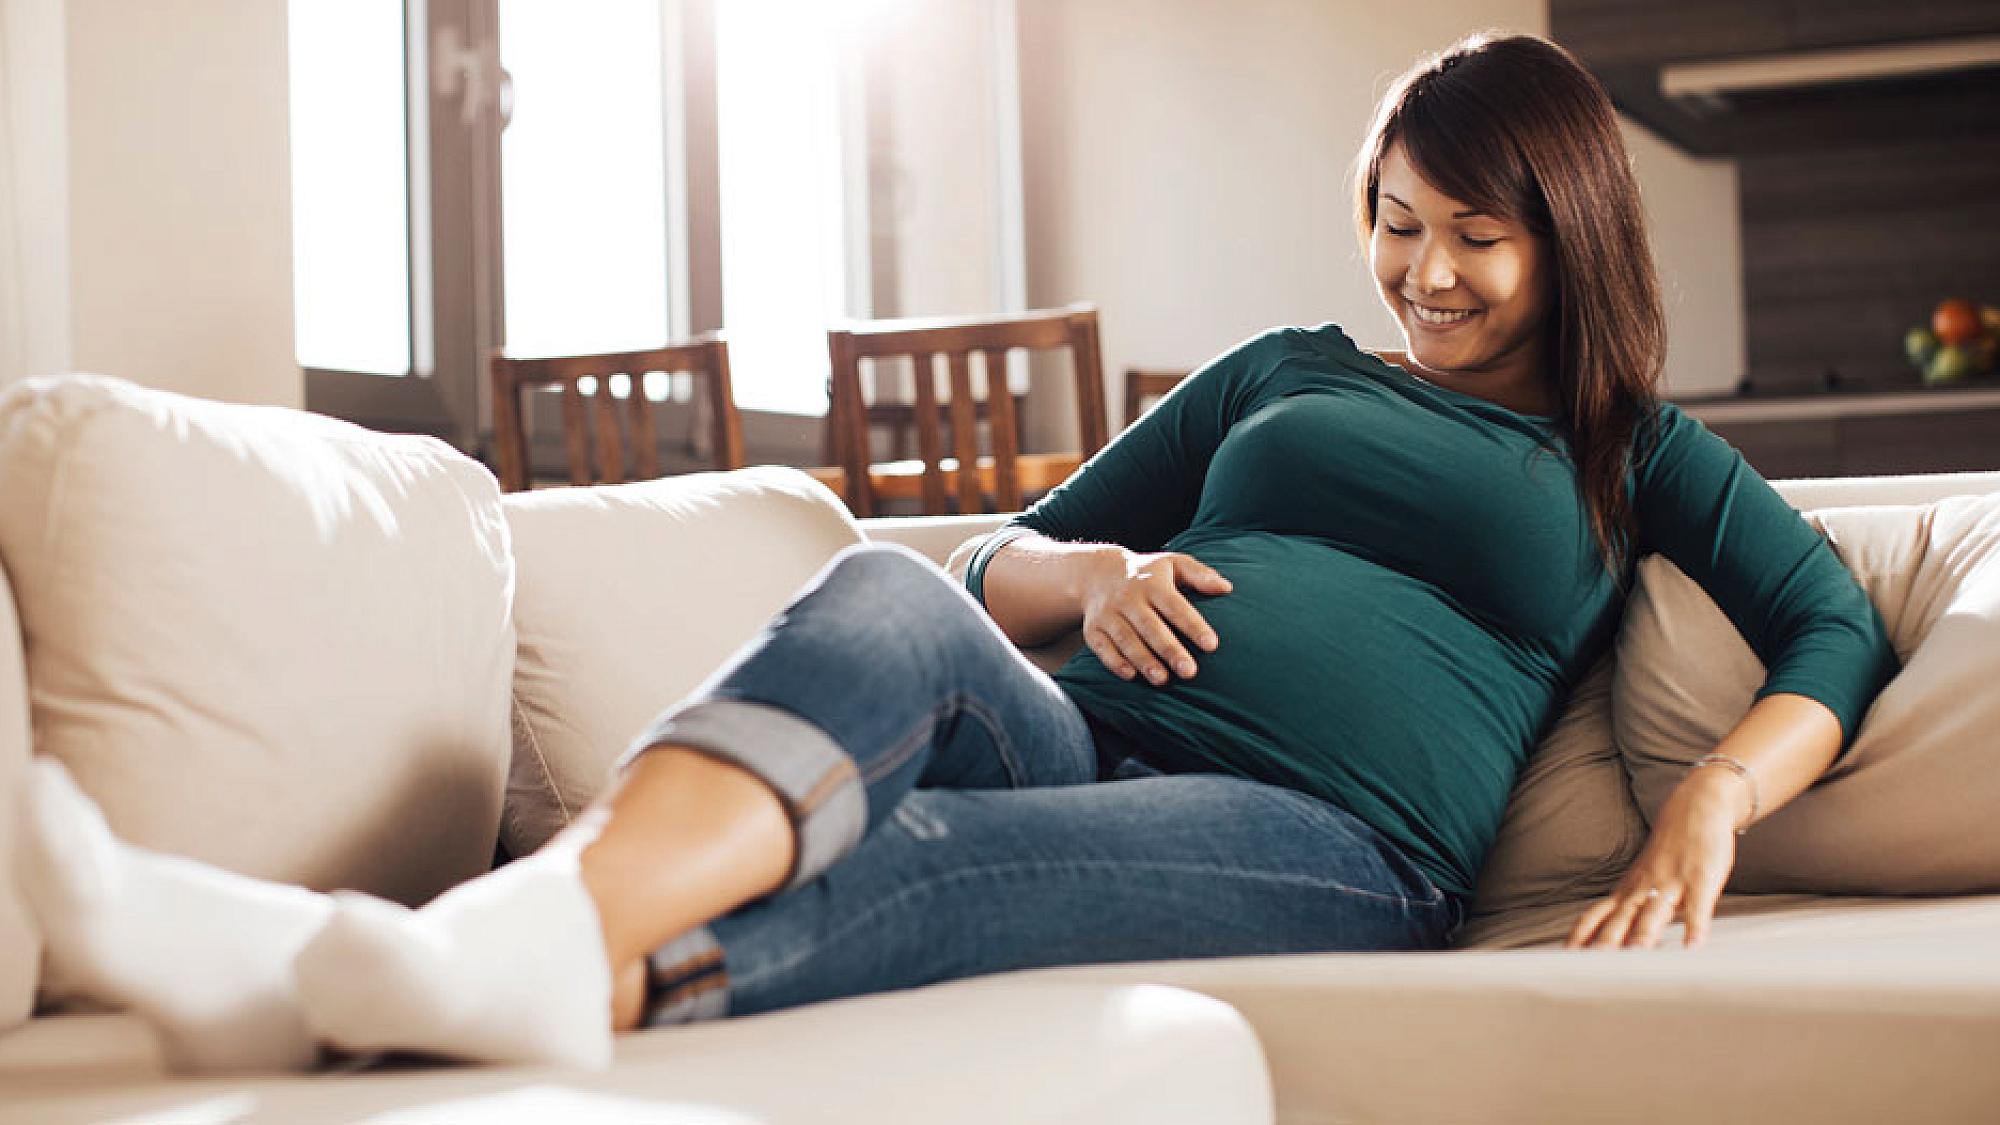 Pregnant Woman on Couch